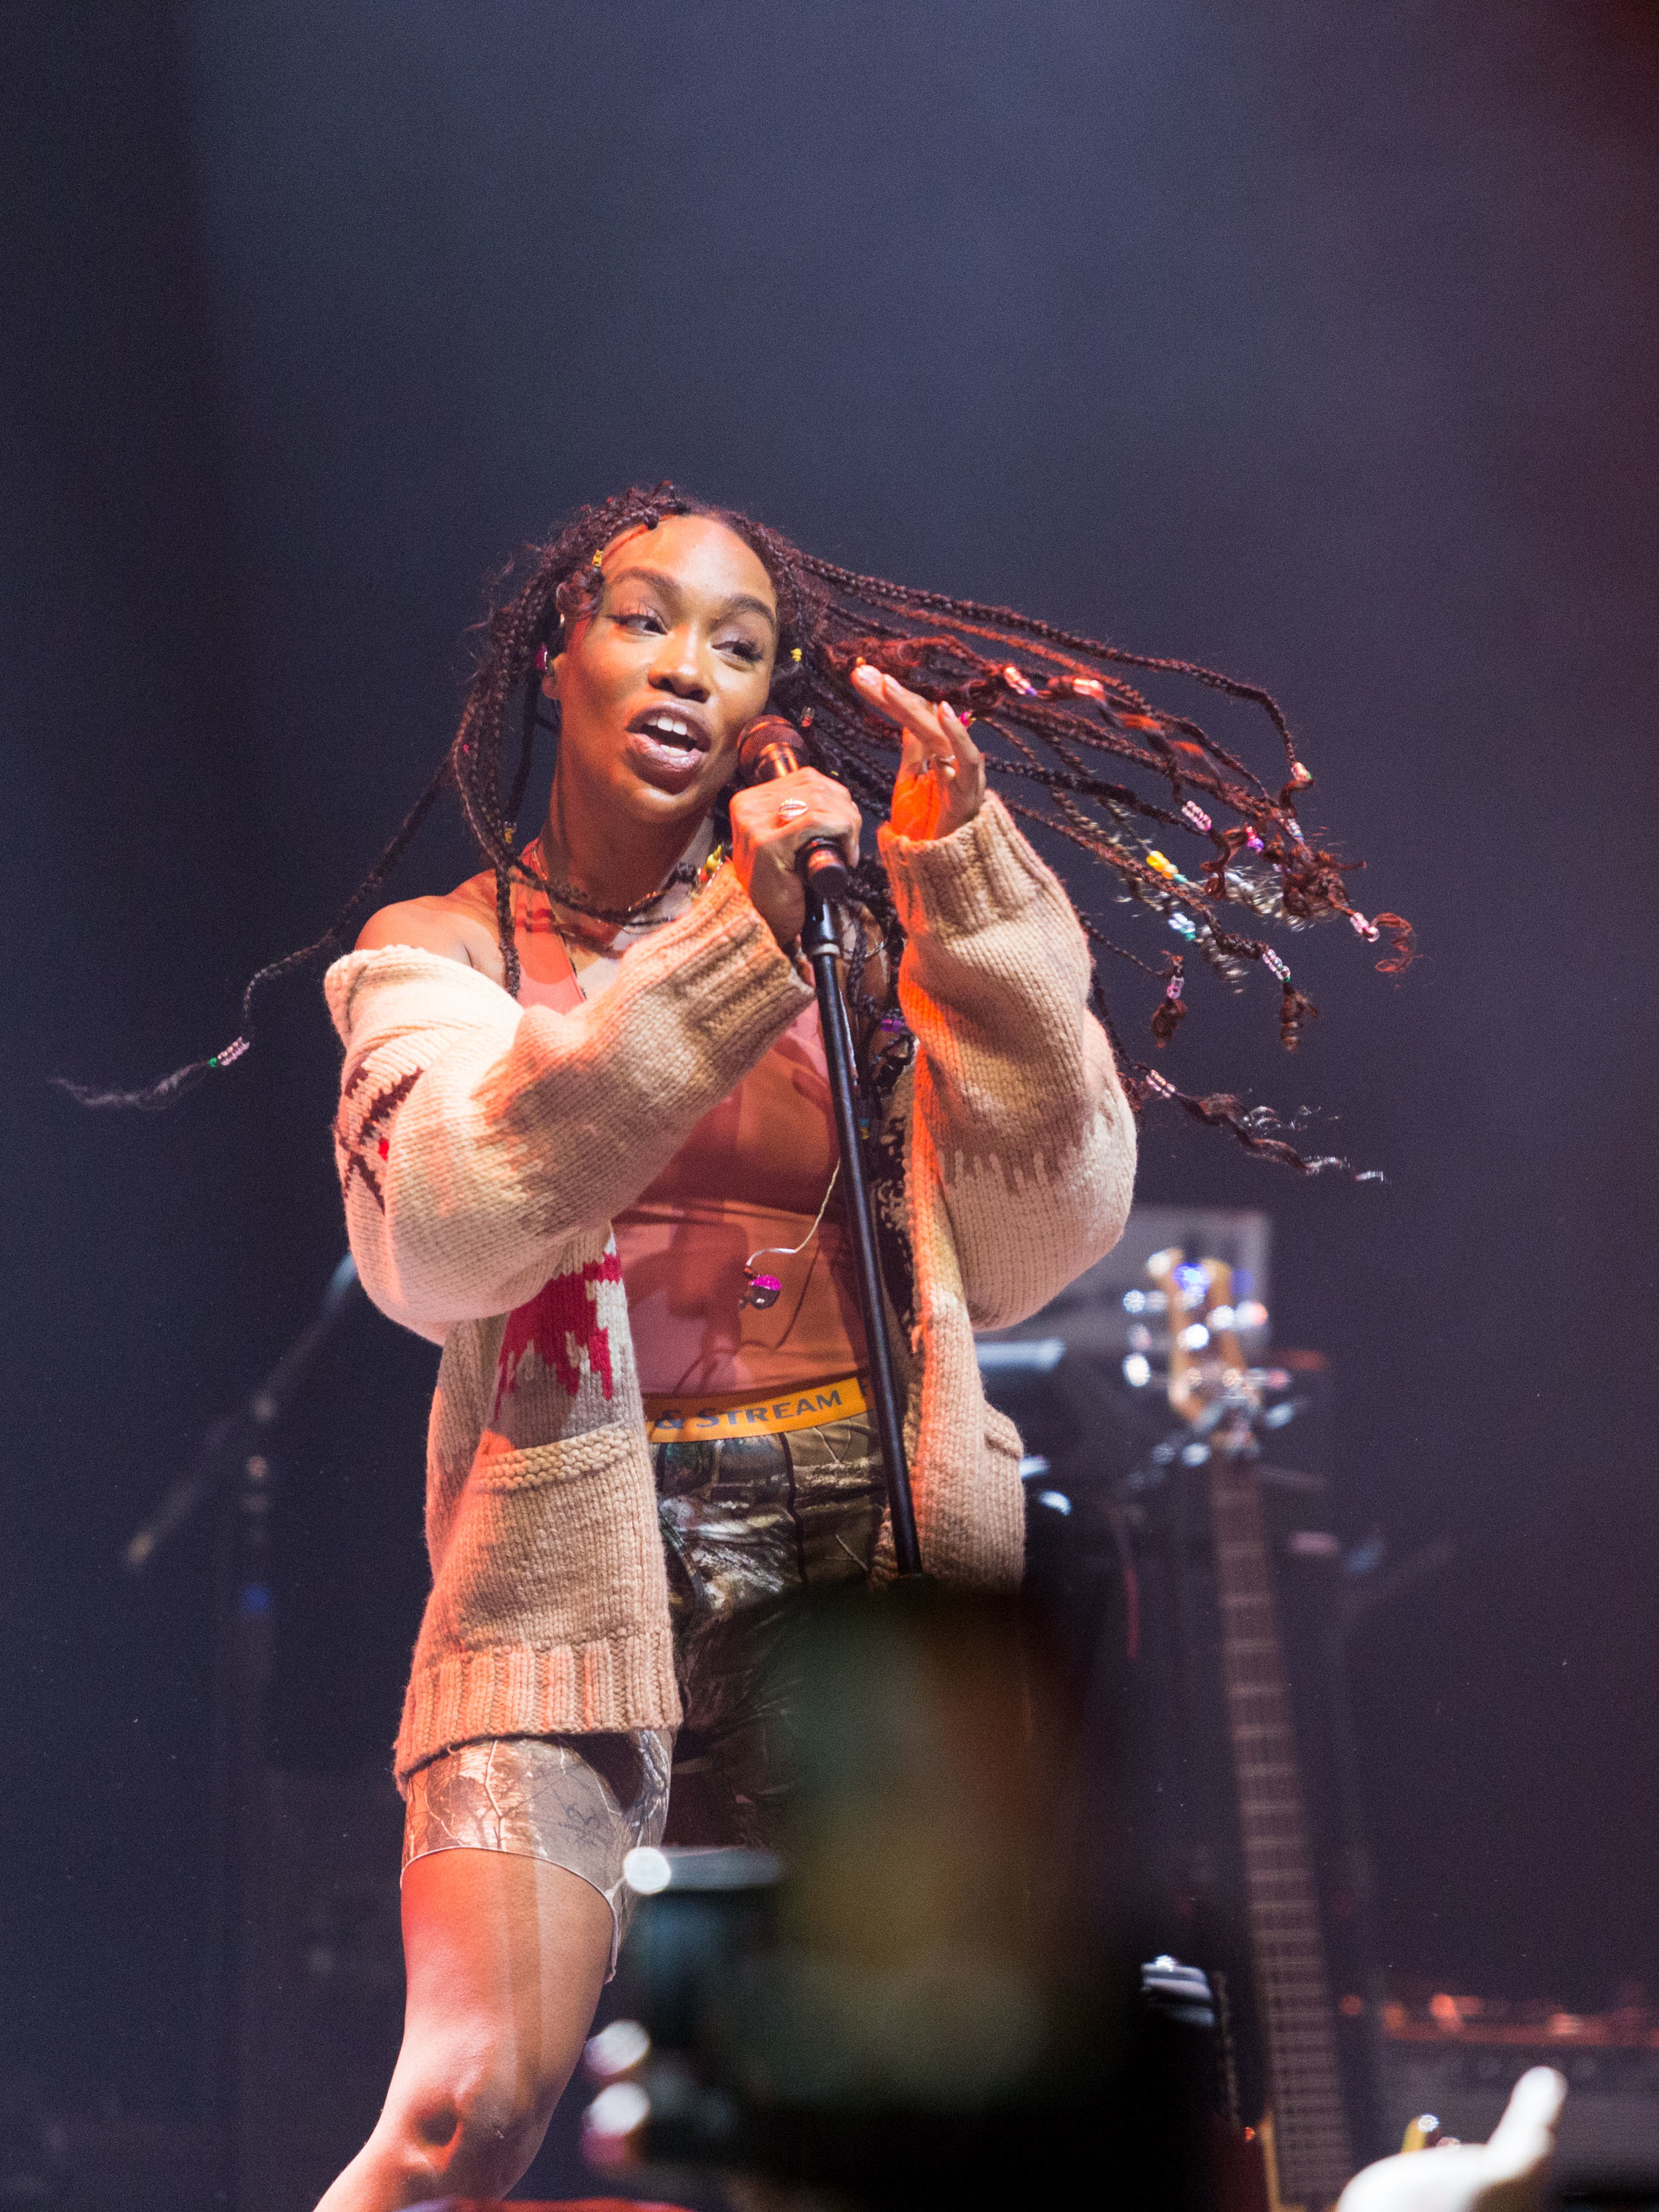  American R&amp;B singer Solána Imani Rowe "SZA" dances on stage during her performace of "Broken Clocks" off of her debut album "Ctrl" at the Novo in Los Angeles, Calif. on Tuesday, Nov. 14, 2017. The show was not orignially on SZA's "Ctrl" tour but